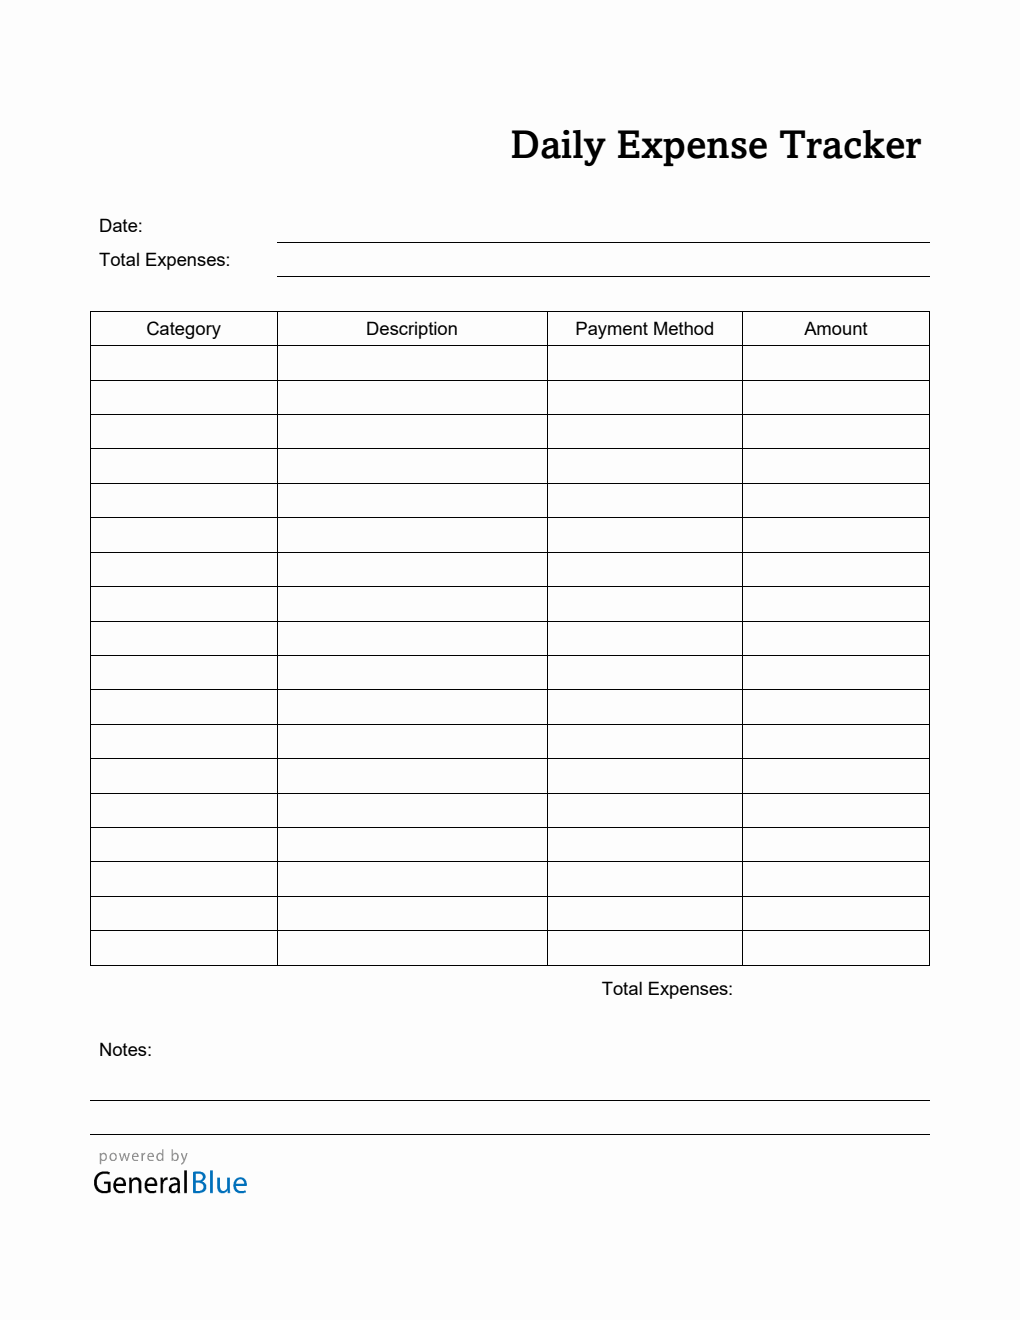 Daily Expense Tracker in PDF (Printable)